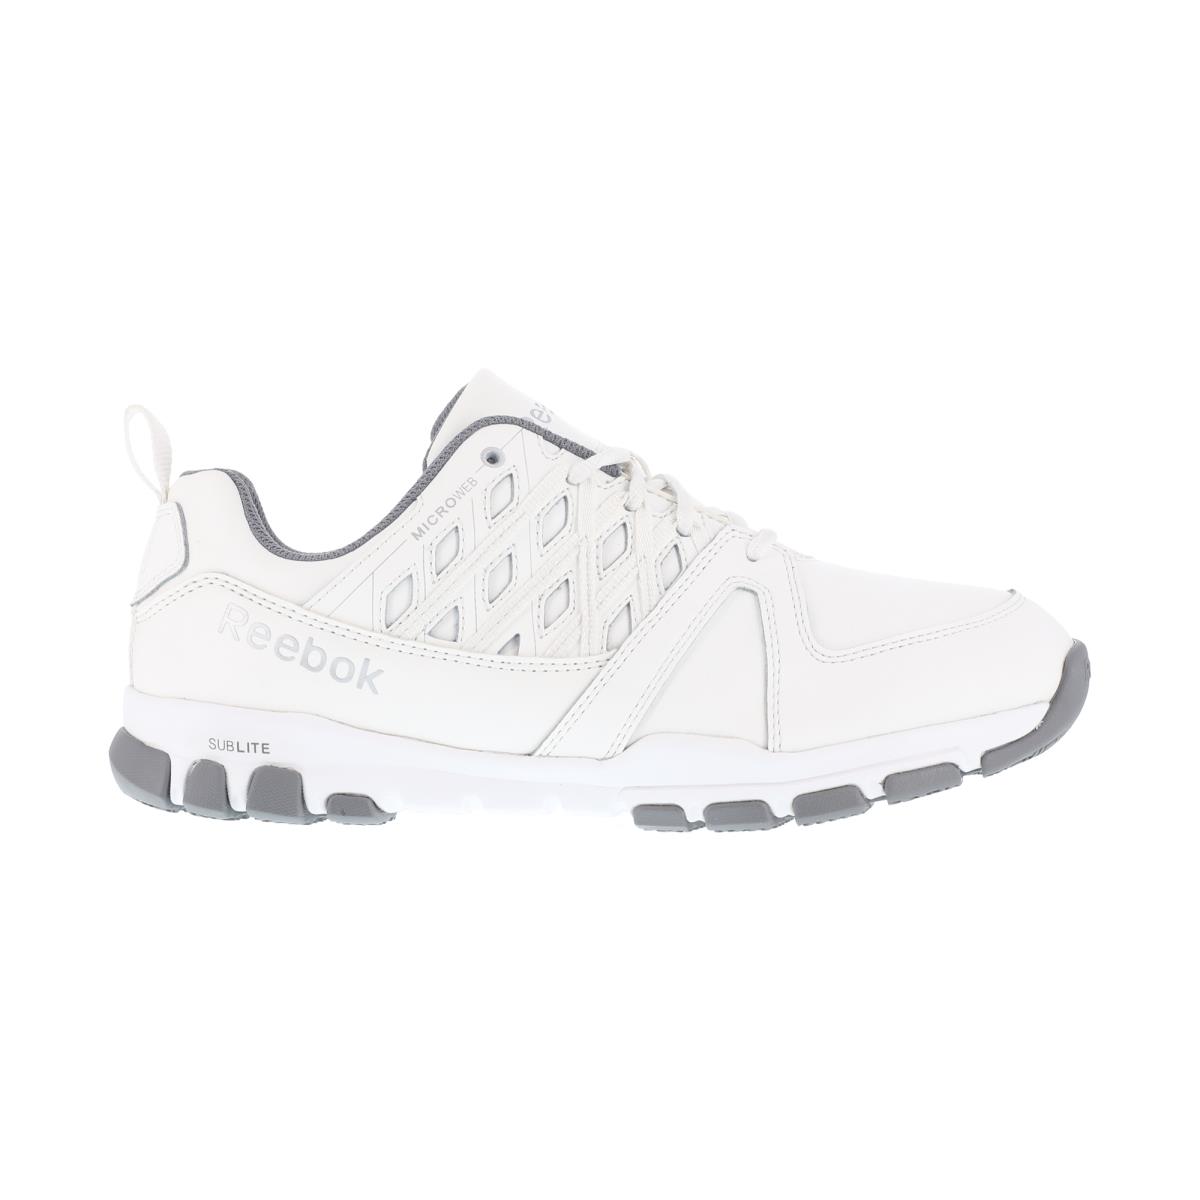 Reebok Womens White Leather Work Shoes AT Sublite Cushion M